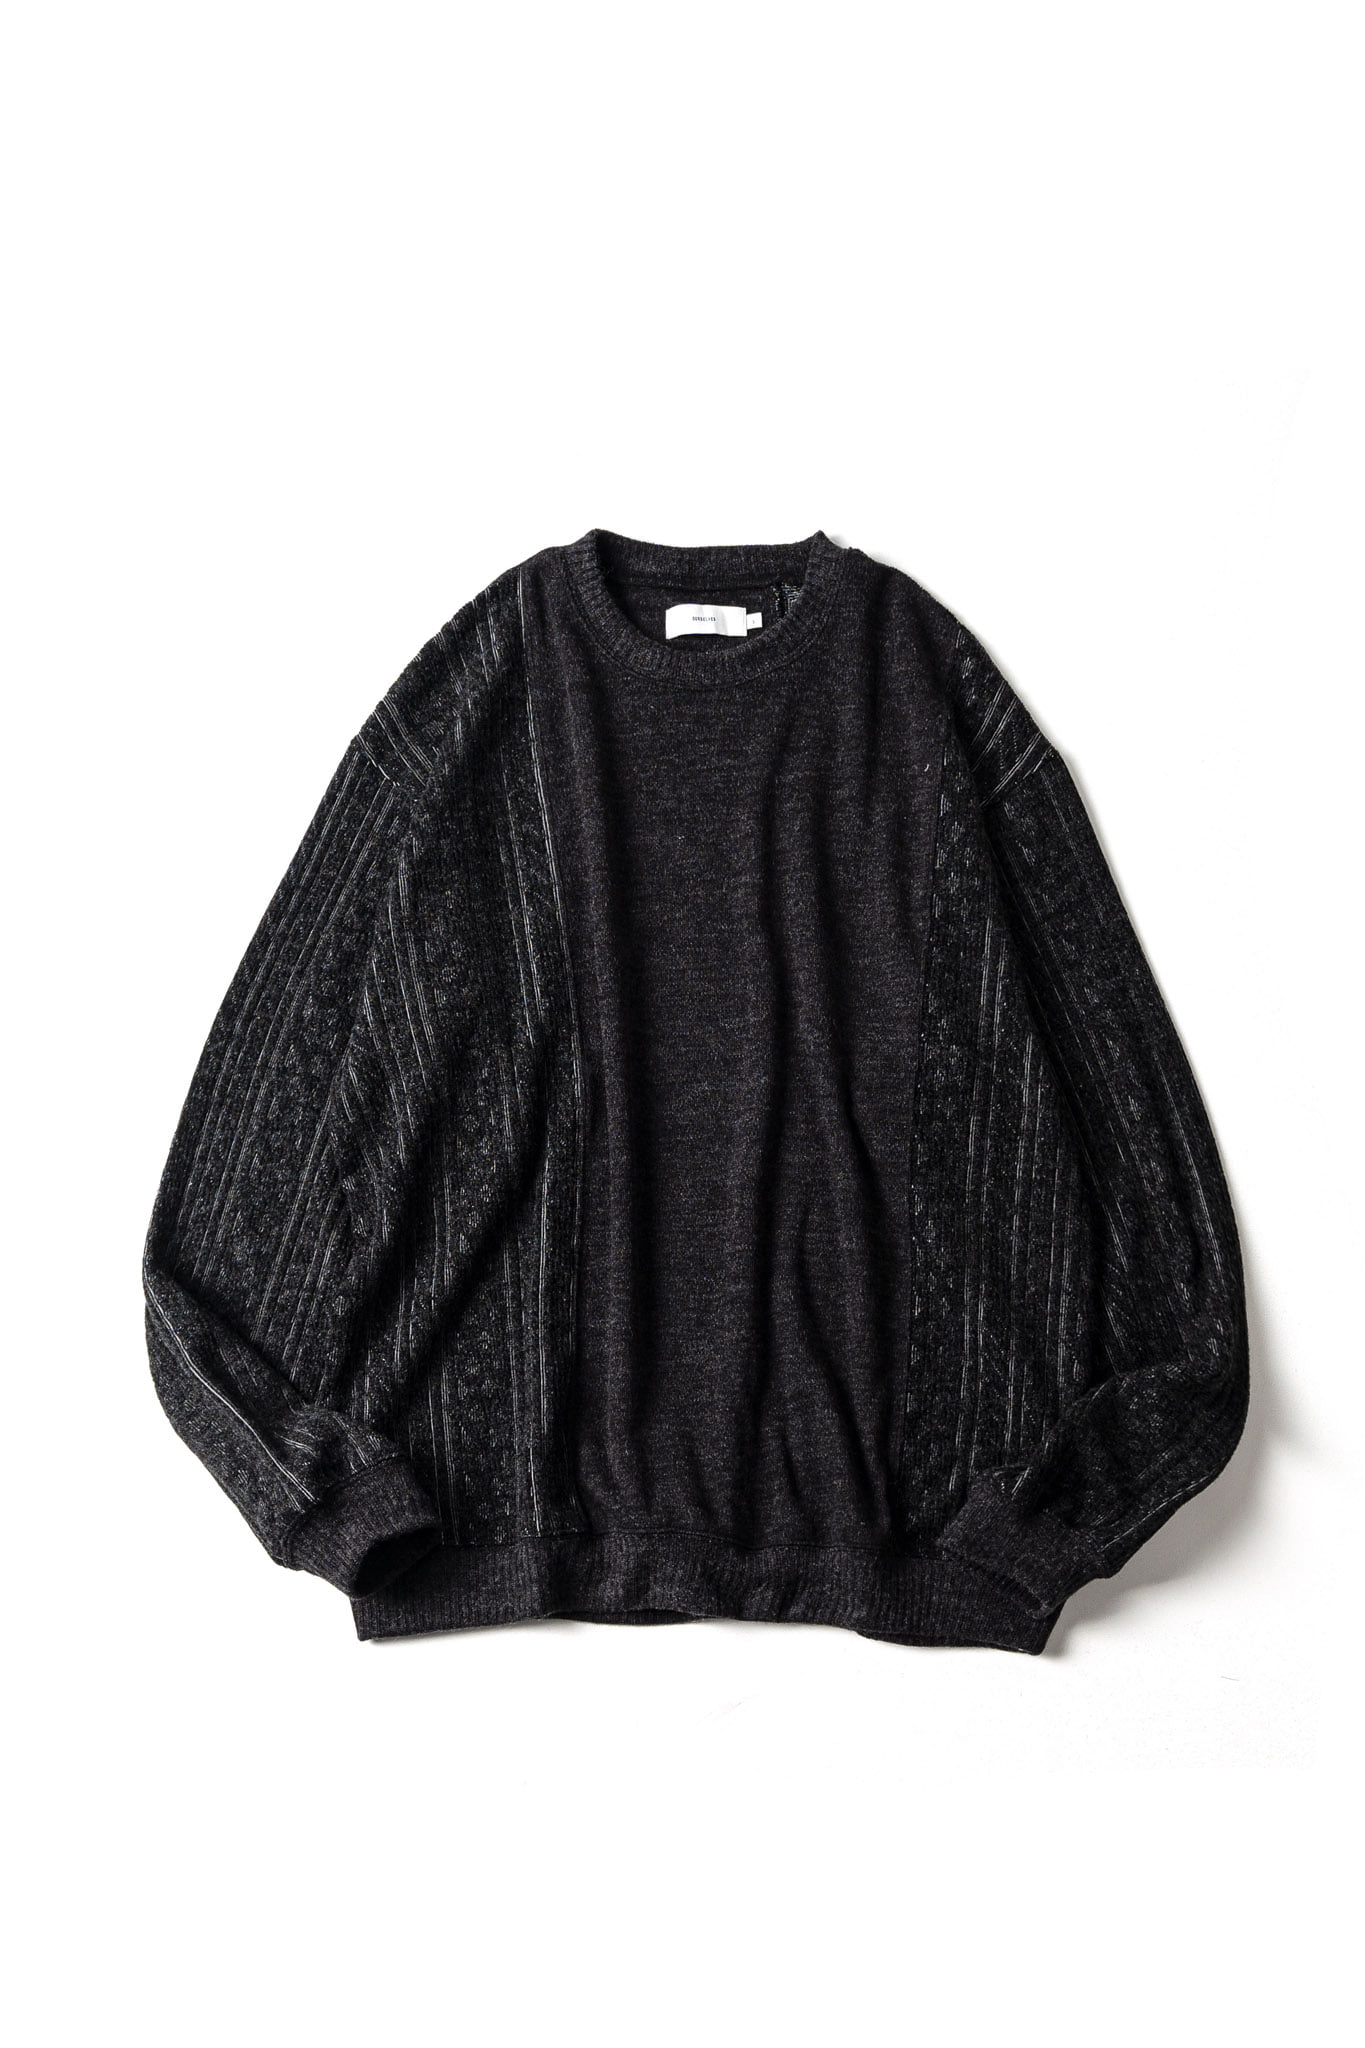 FINE WOOL ROUND NECK KNIT - VINTAGE CHARCOAL